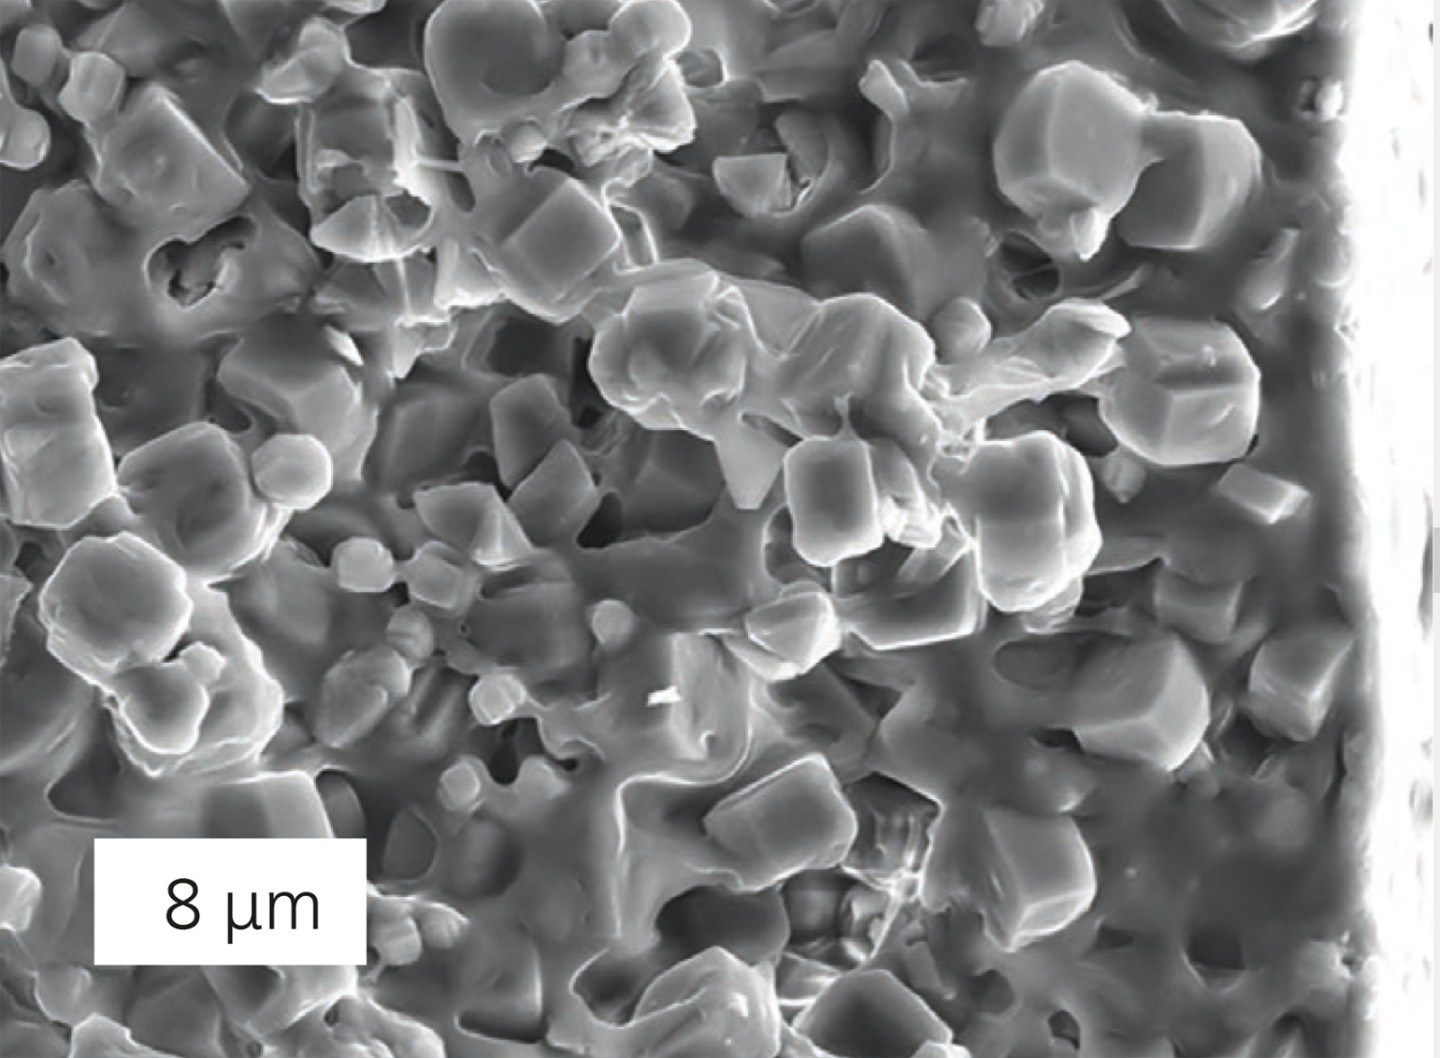 Scanning electron micrograph of a composite membrane